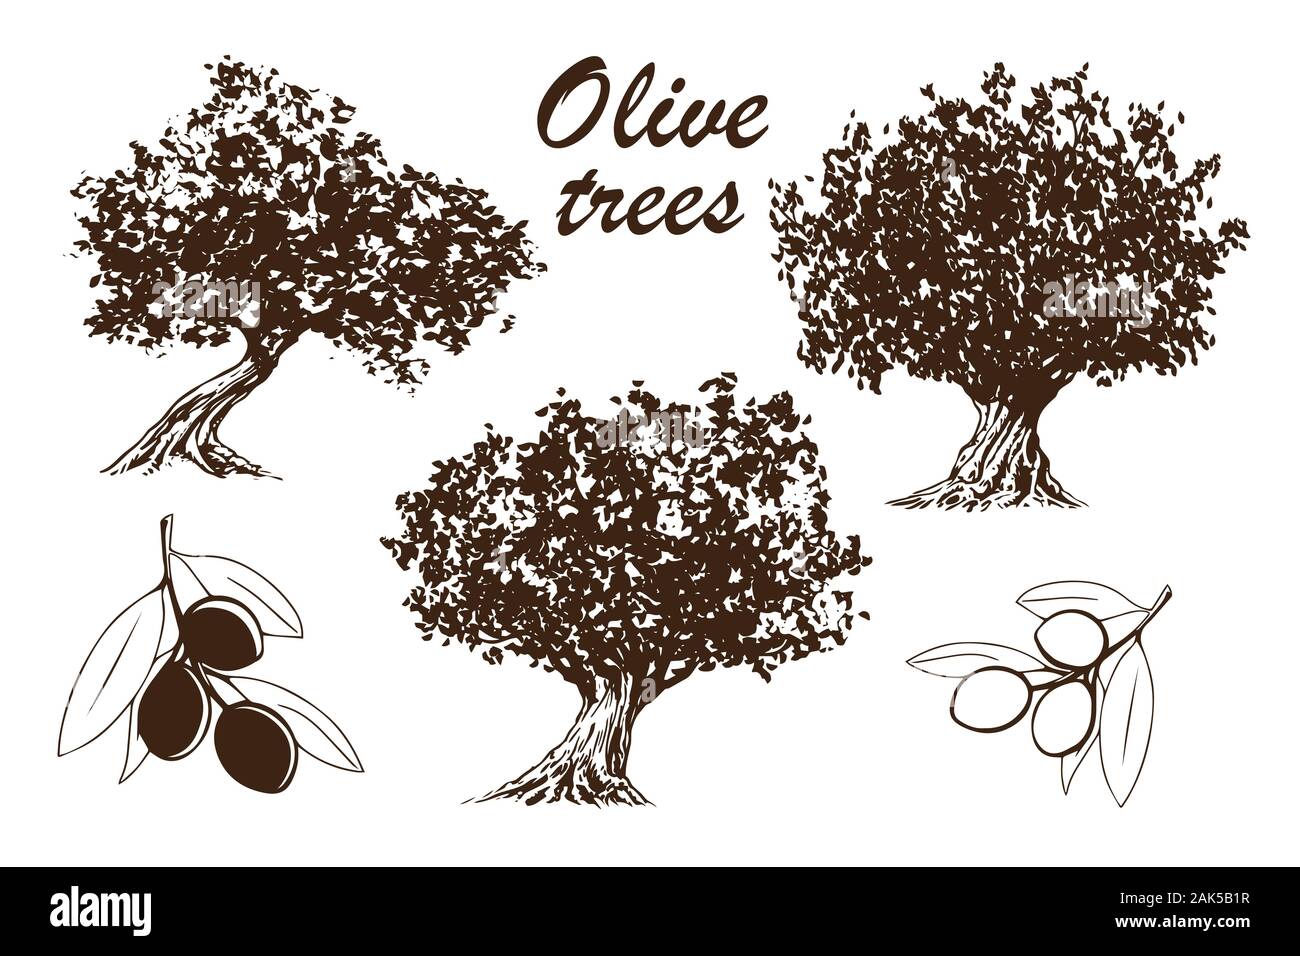 olive tree - set of hand drawn illustrations of trees and branches with olives - black and white drawing on white background (vector) Stock Vector